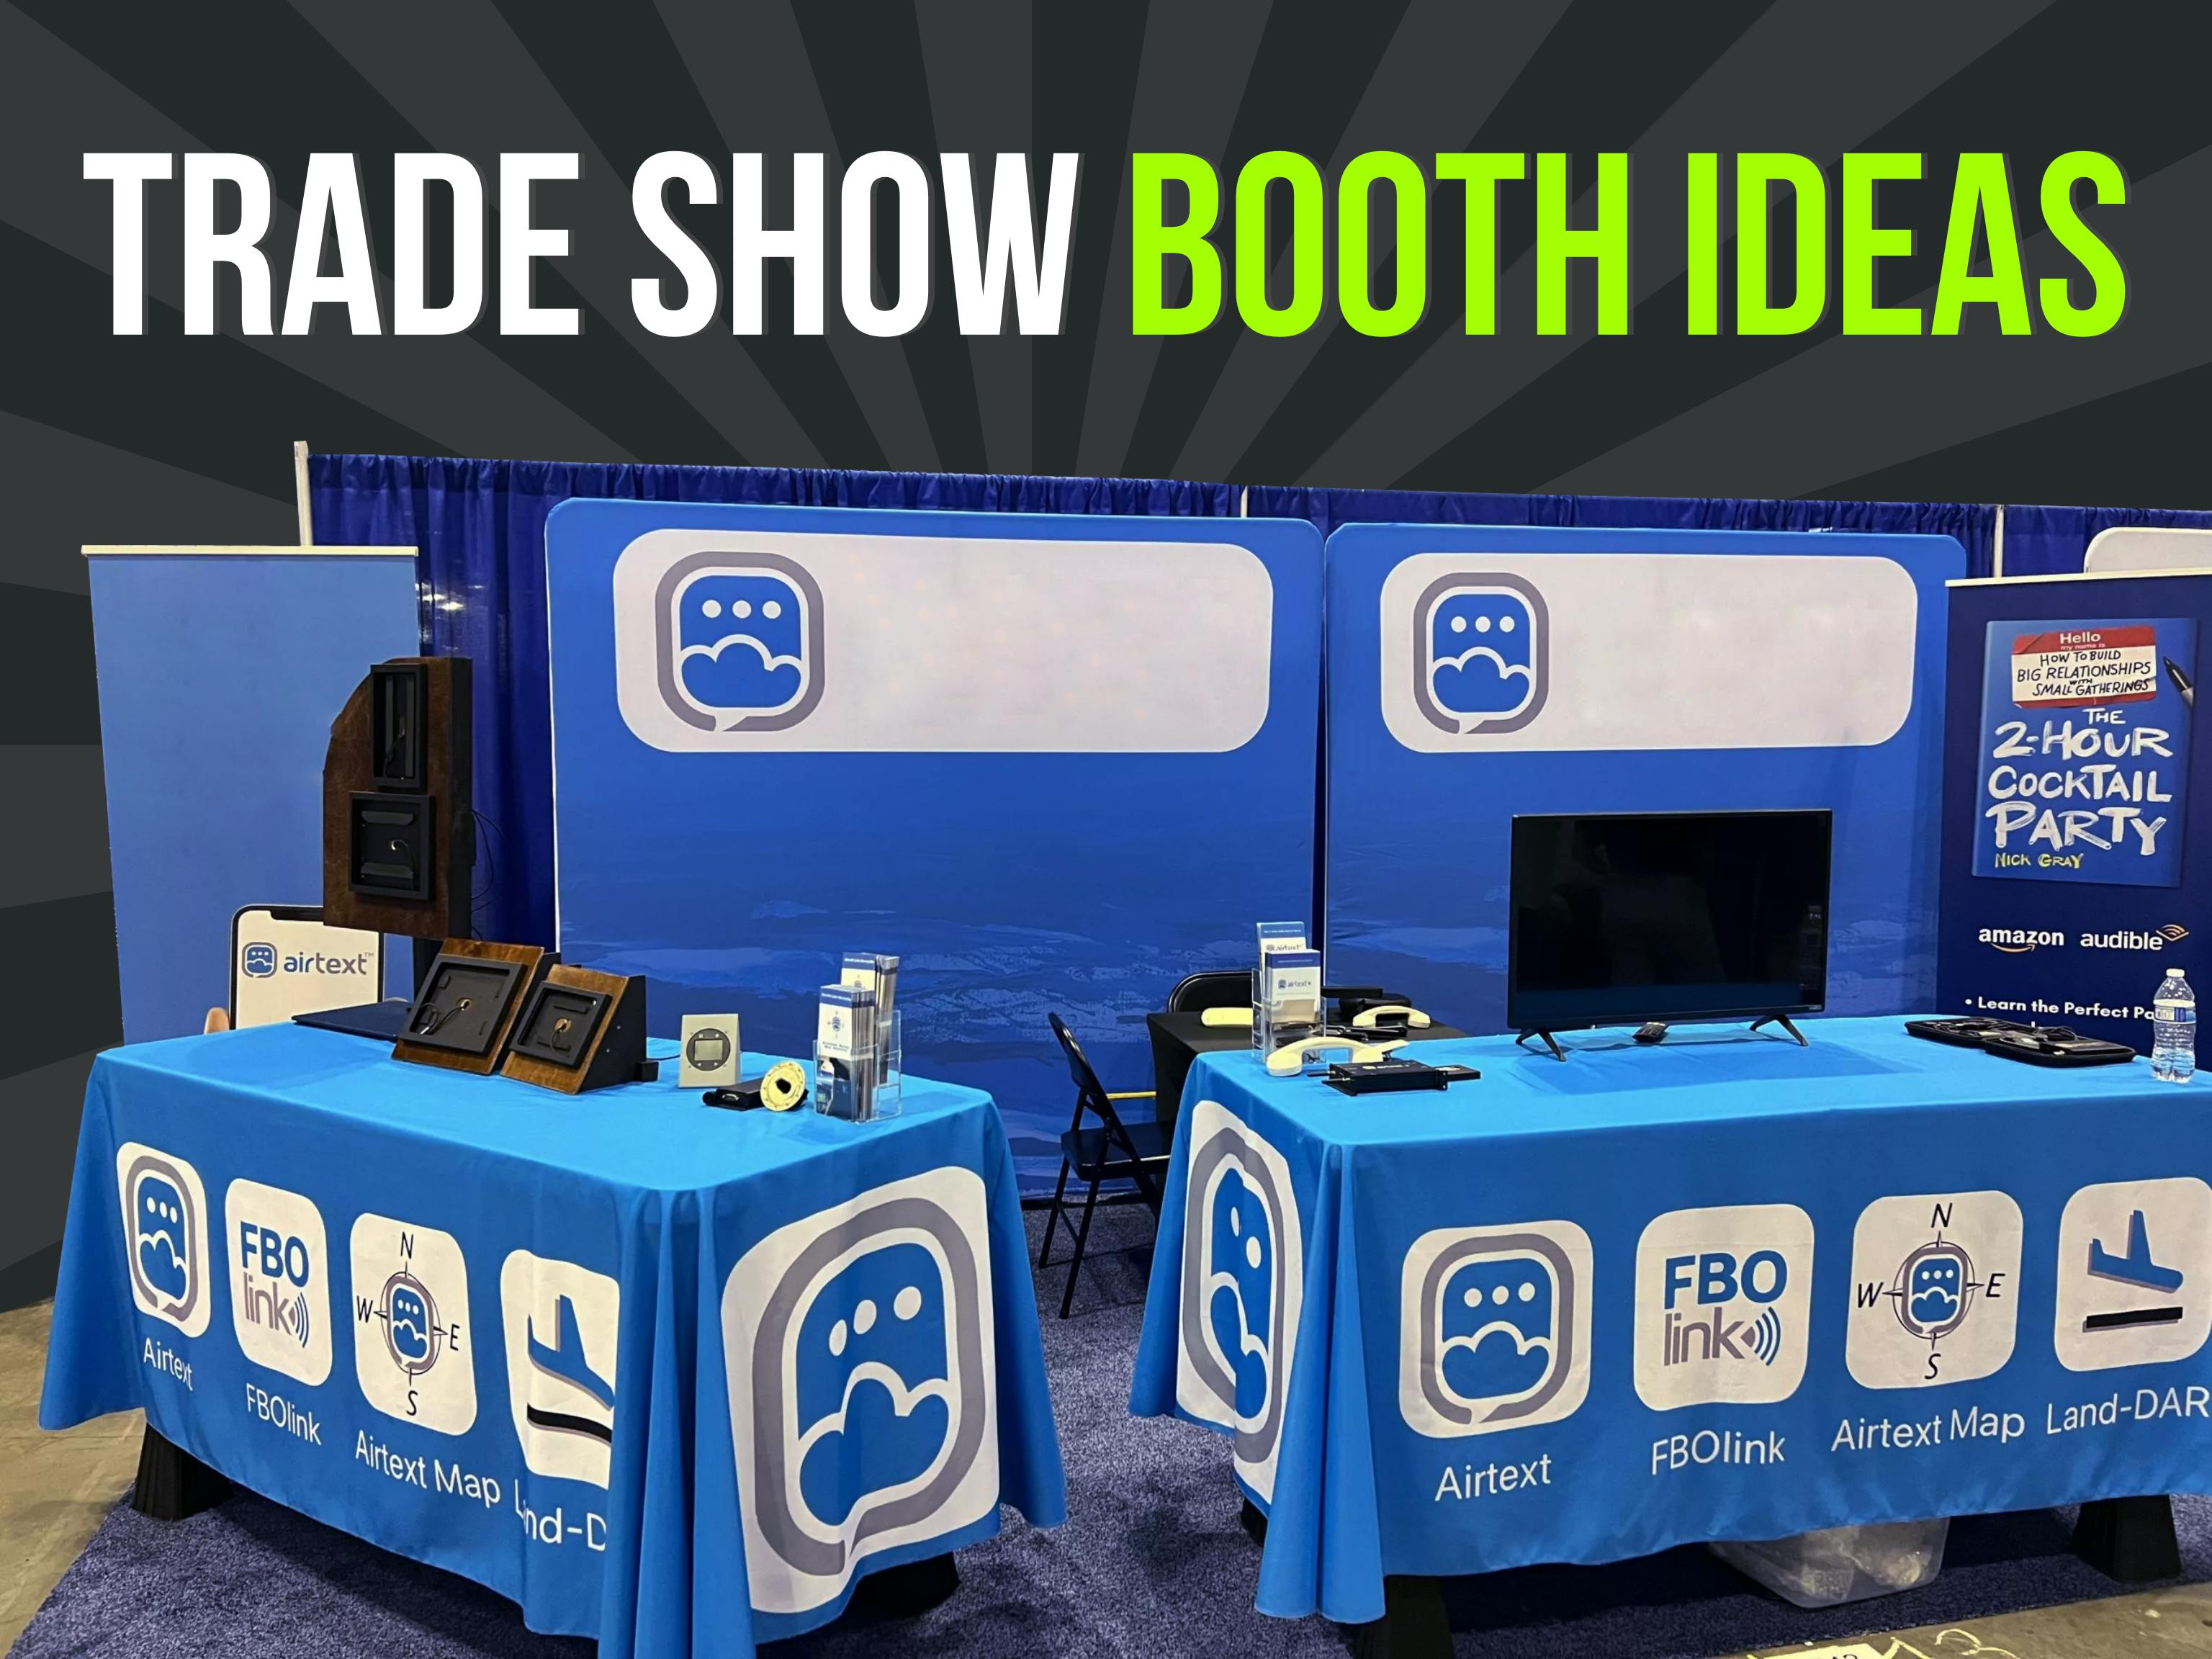 Header text: Trade Show Booth Ideas, in a gray background and a photo of Airtext booth